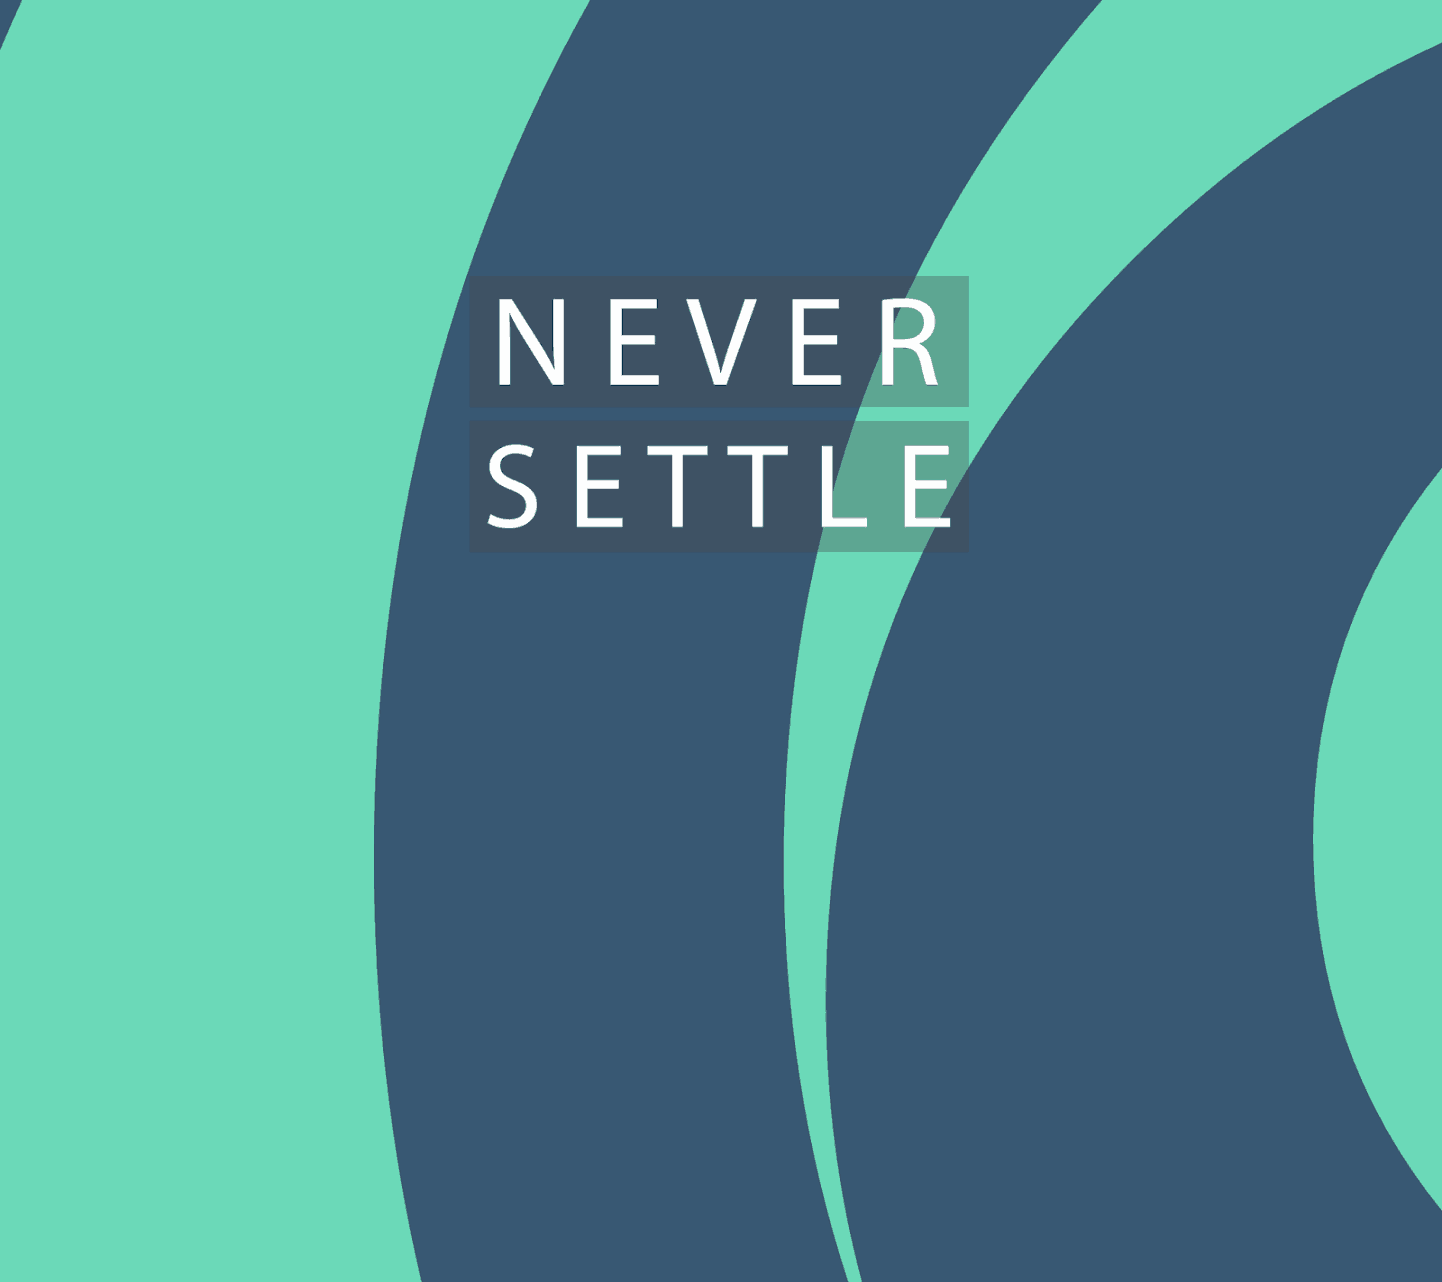 Cult of Android 'Never Settle' wallpaper for your OnePlus